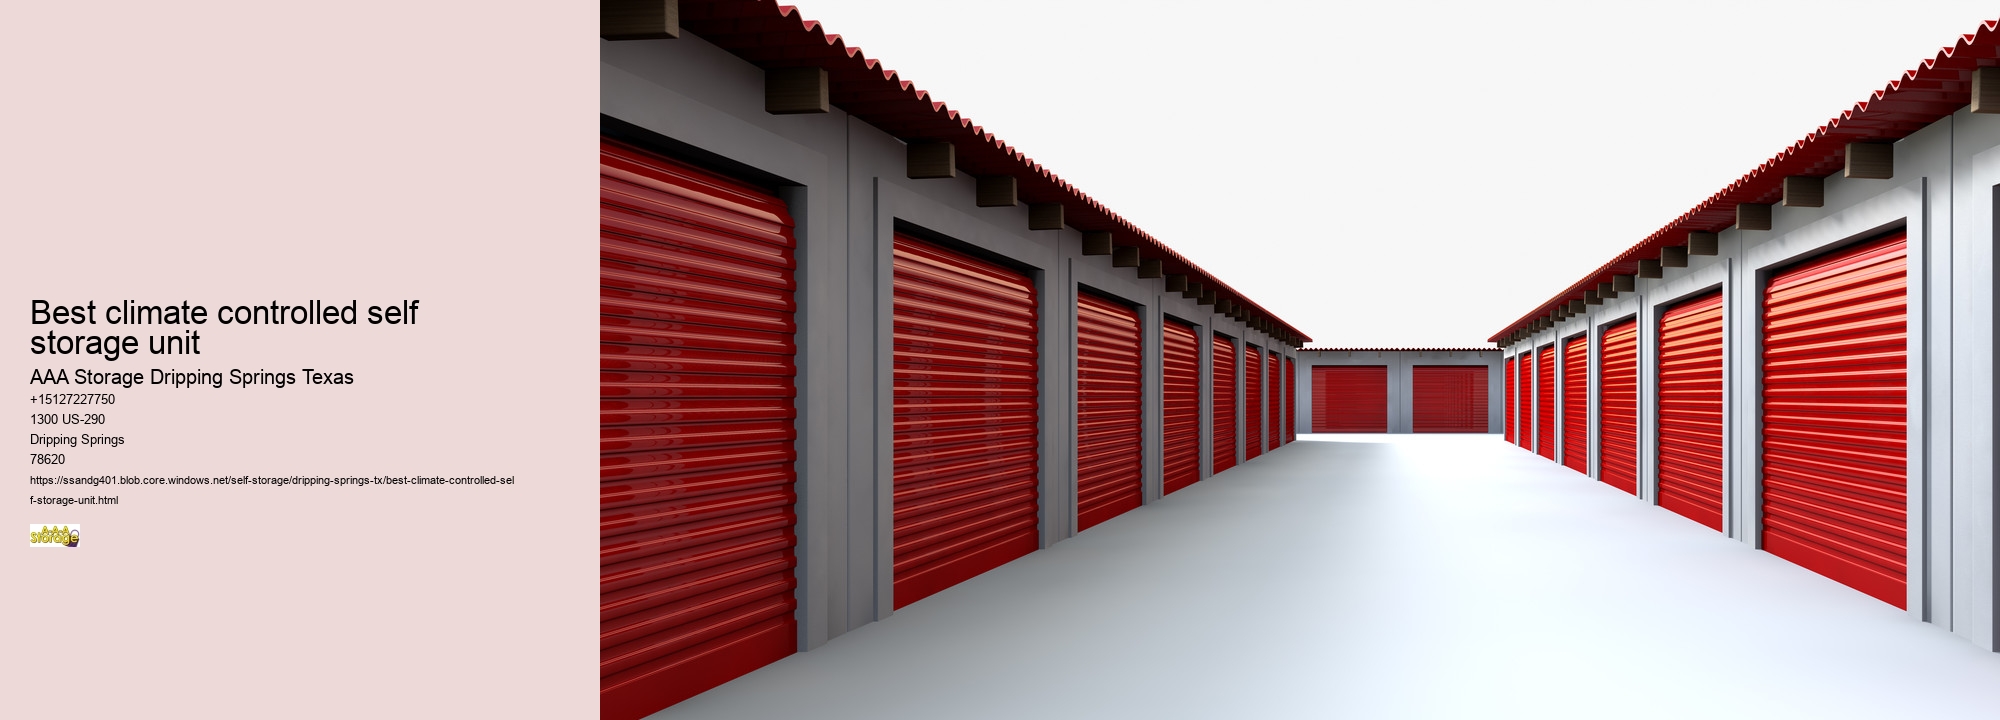 best climate controlled self storage unit